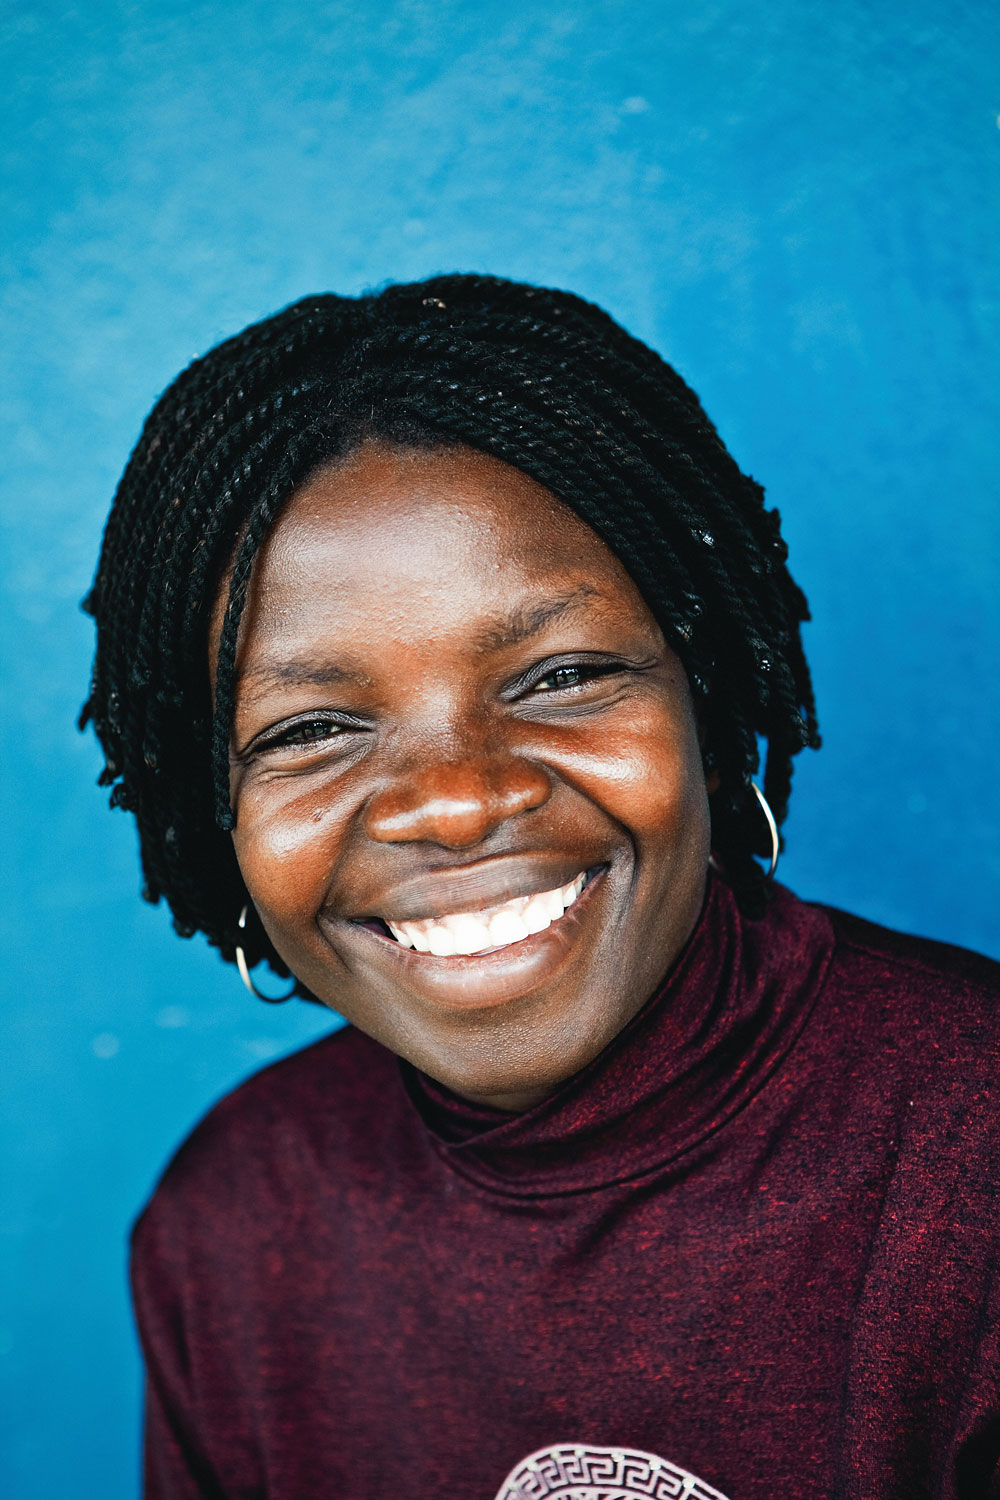 Brightly coloured headshot portrait against a blue background shot on location in rural Malawi.